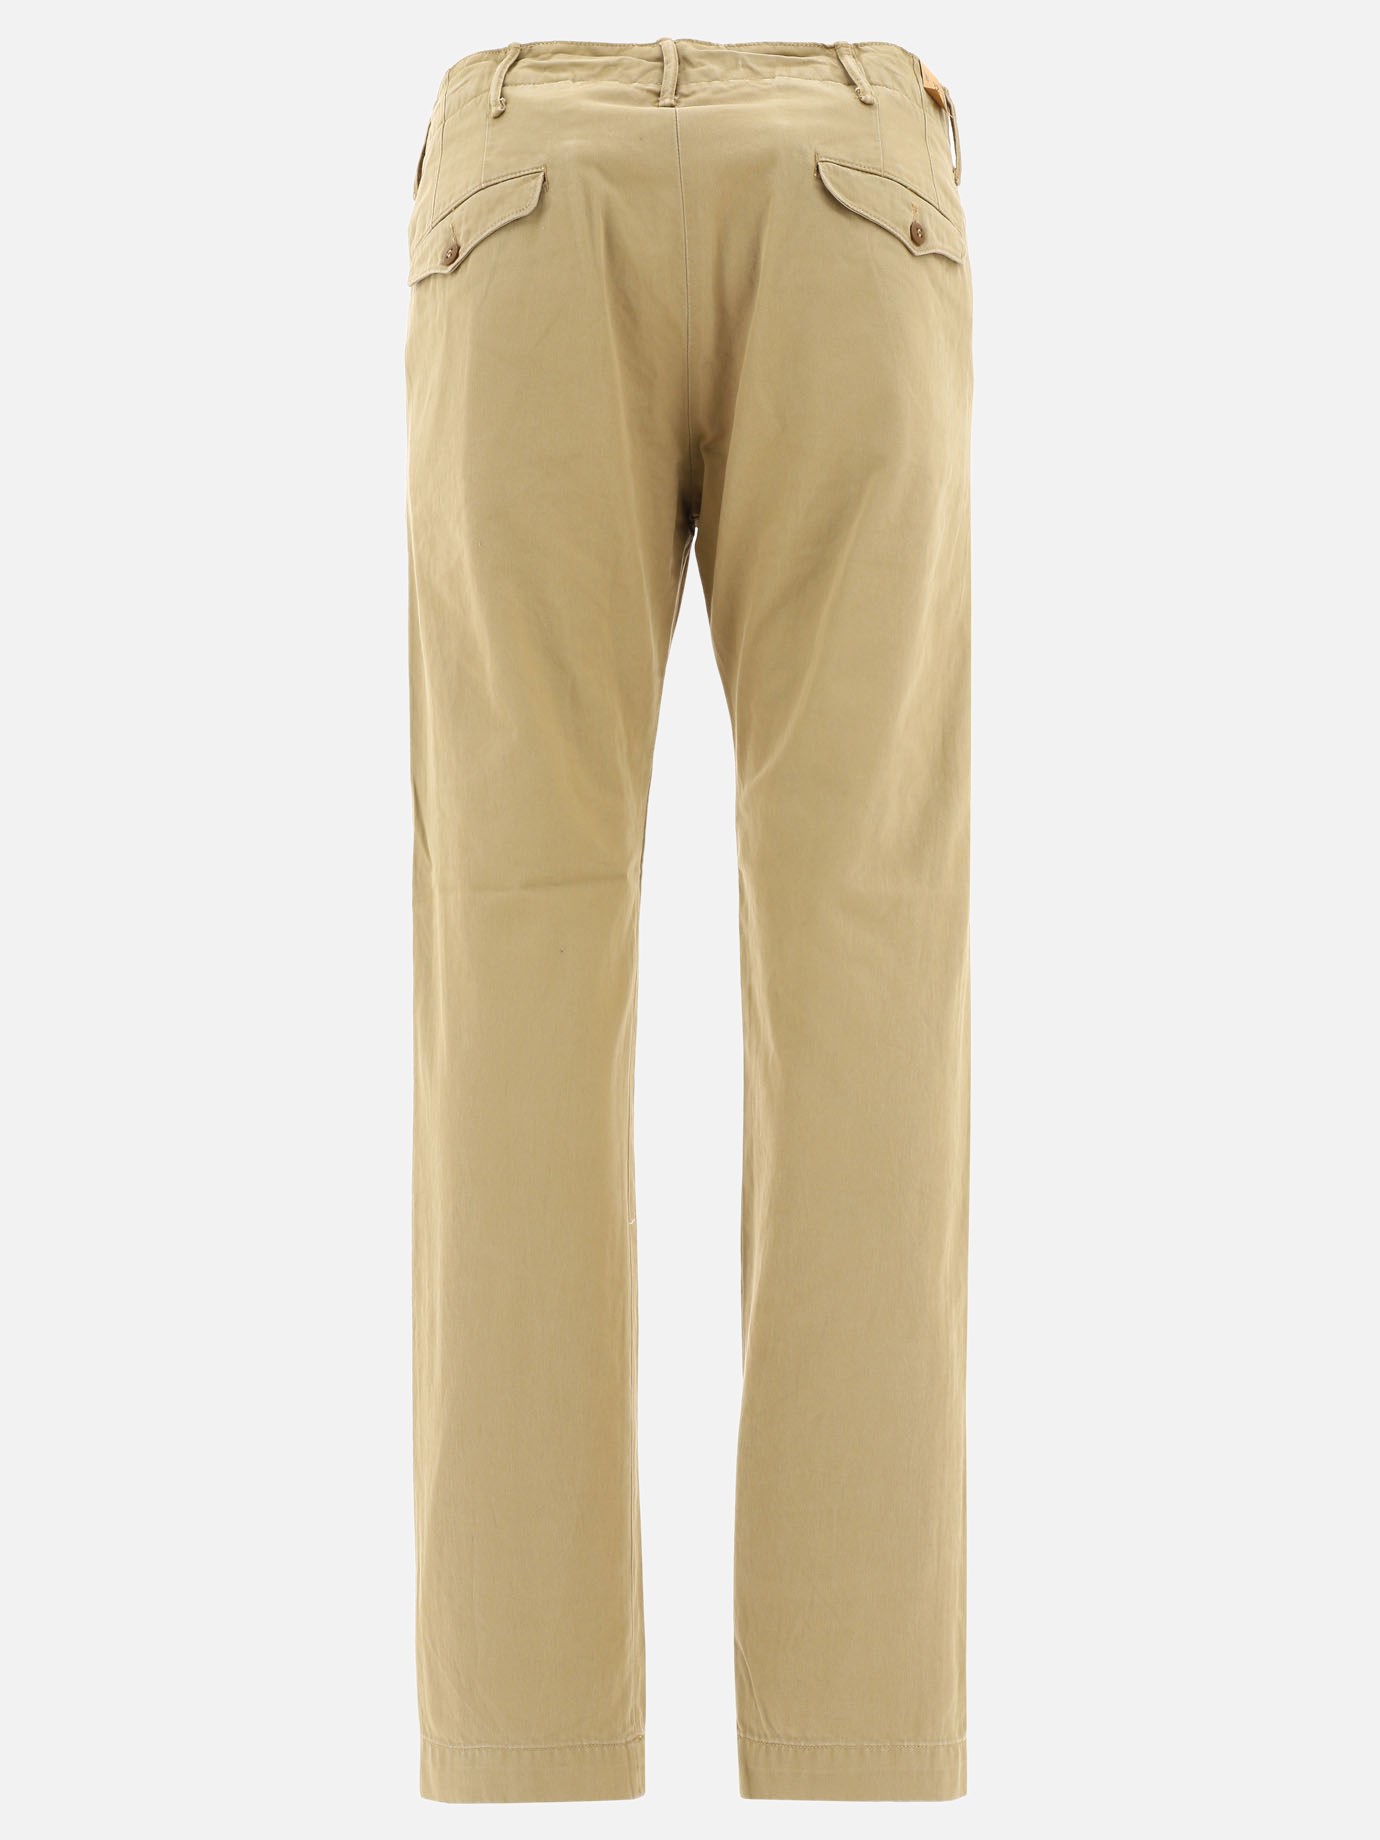  Officer's  chino trousers by RRL by Ralph Lauren